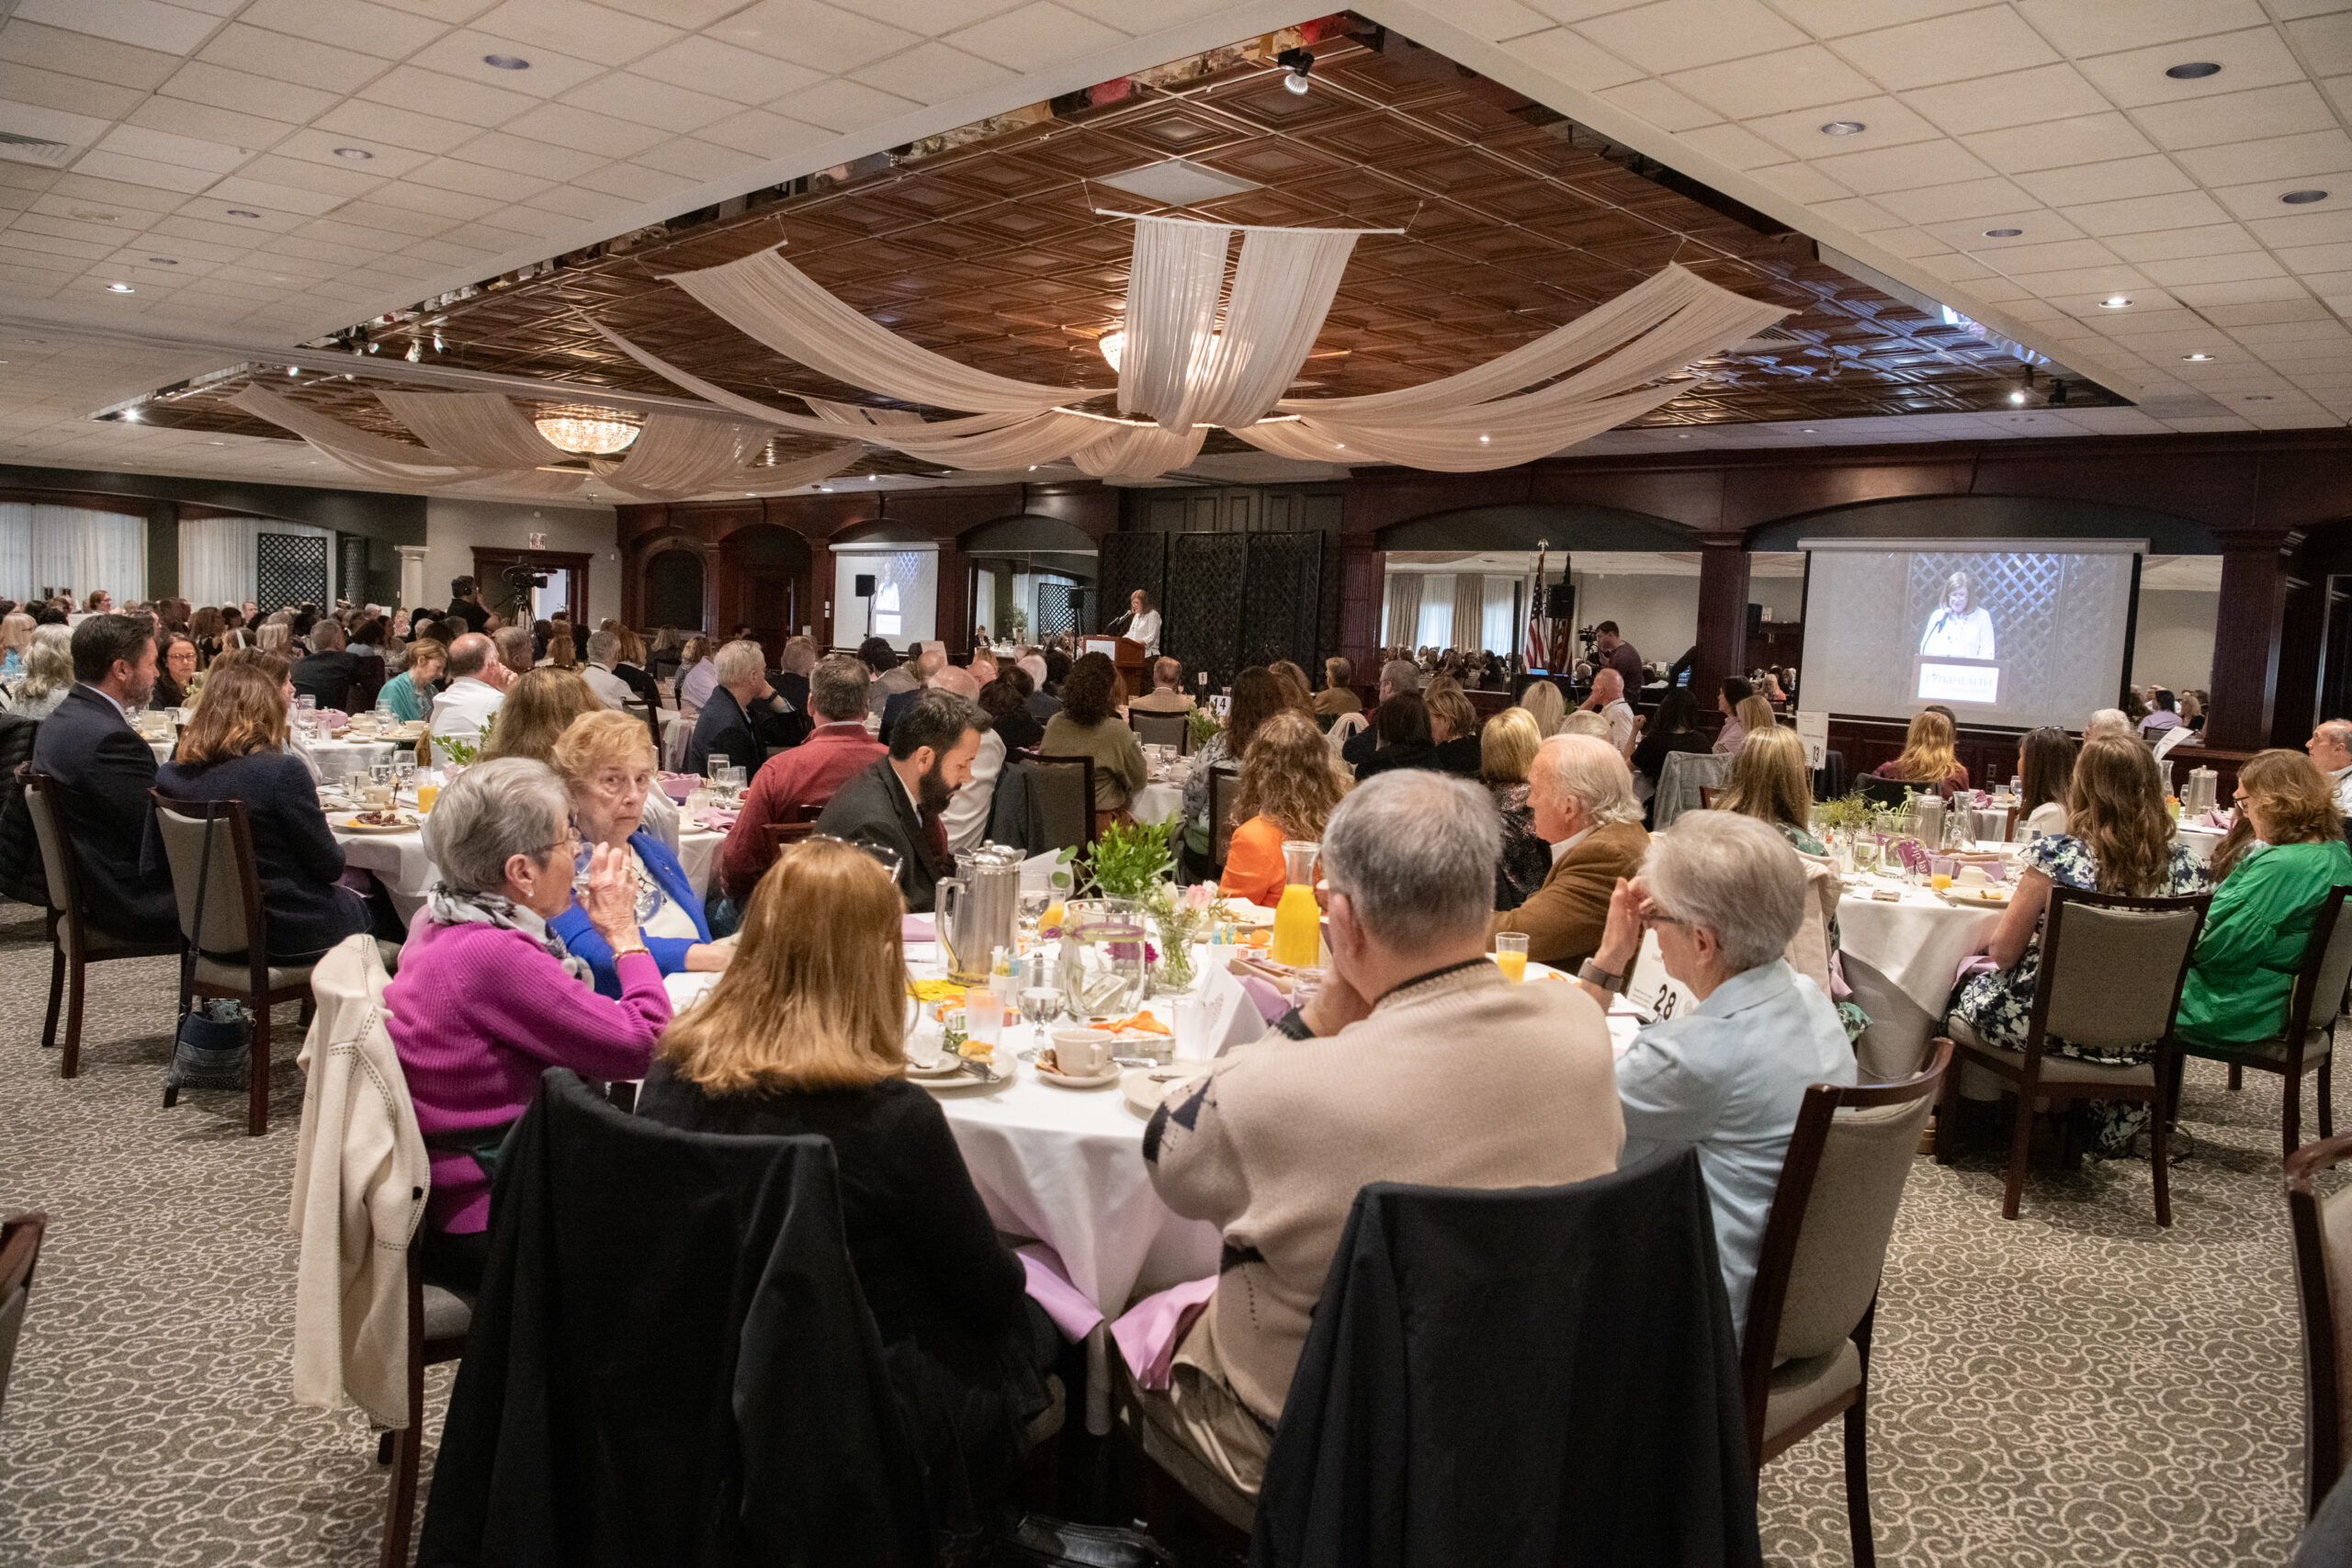 RVNAhealth’s Annual Spring Breakfast Was The Place to Be!